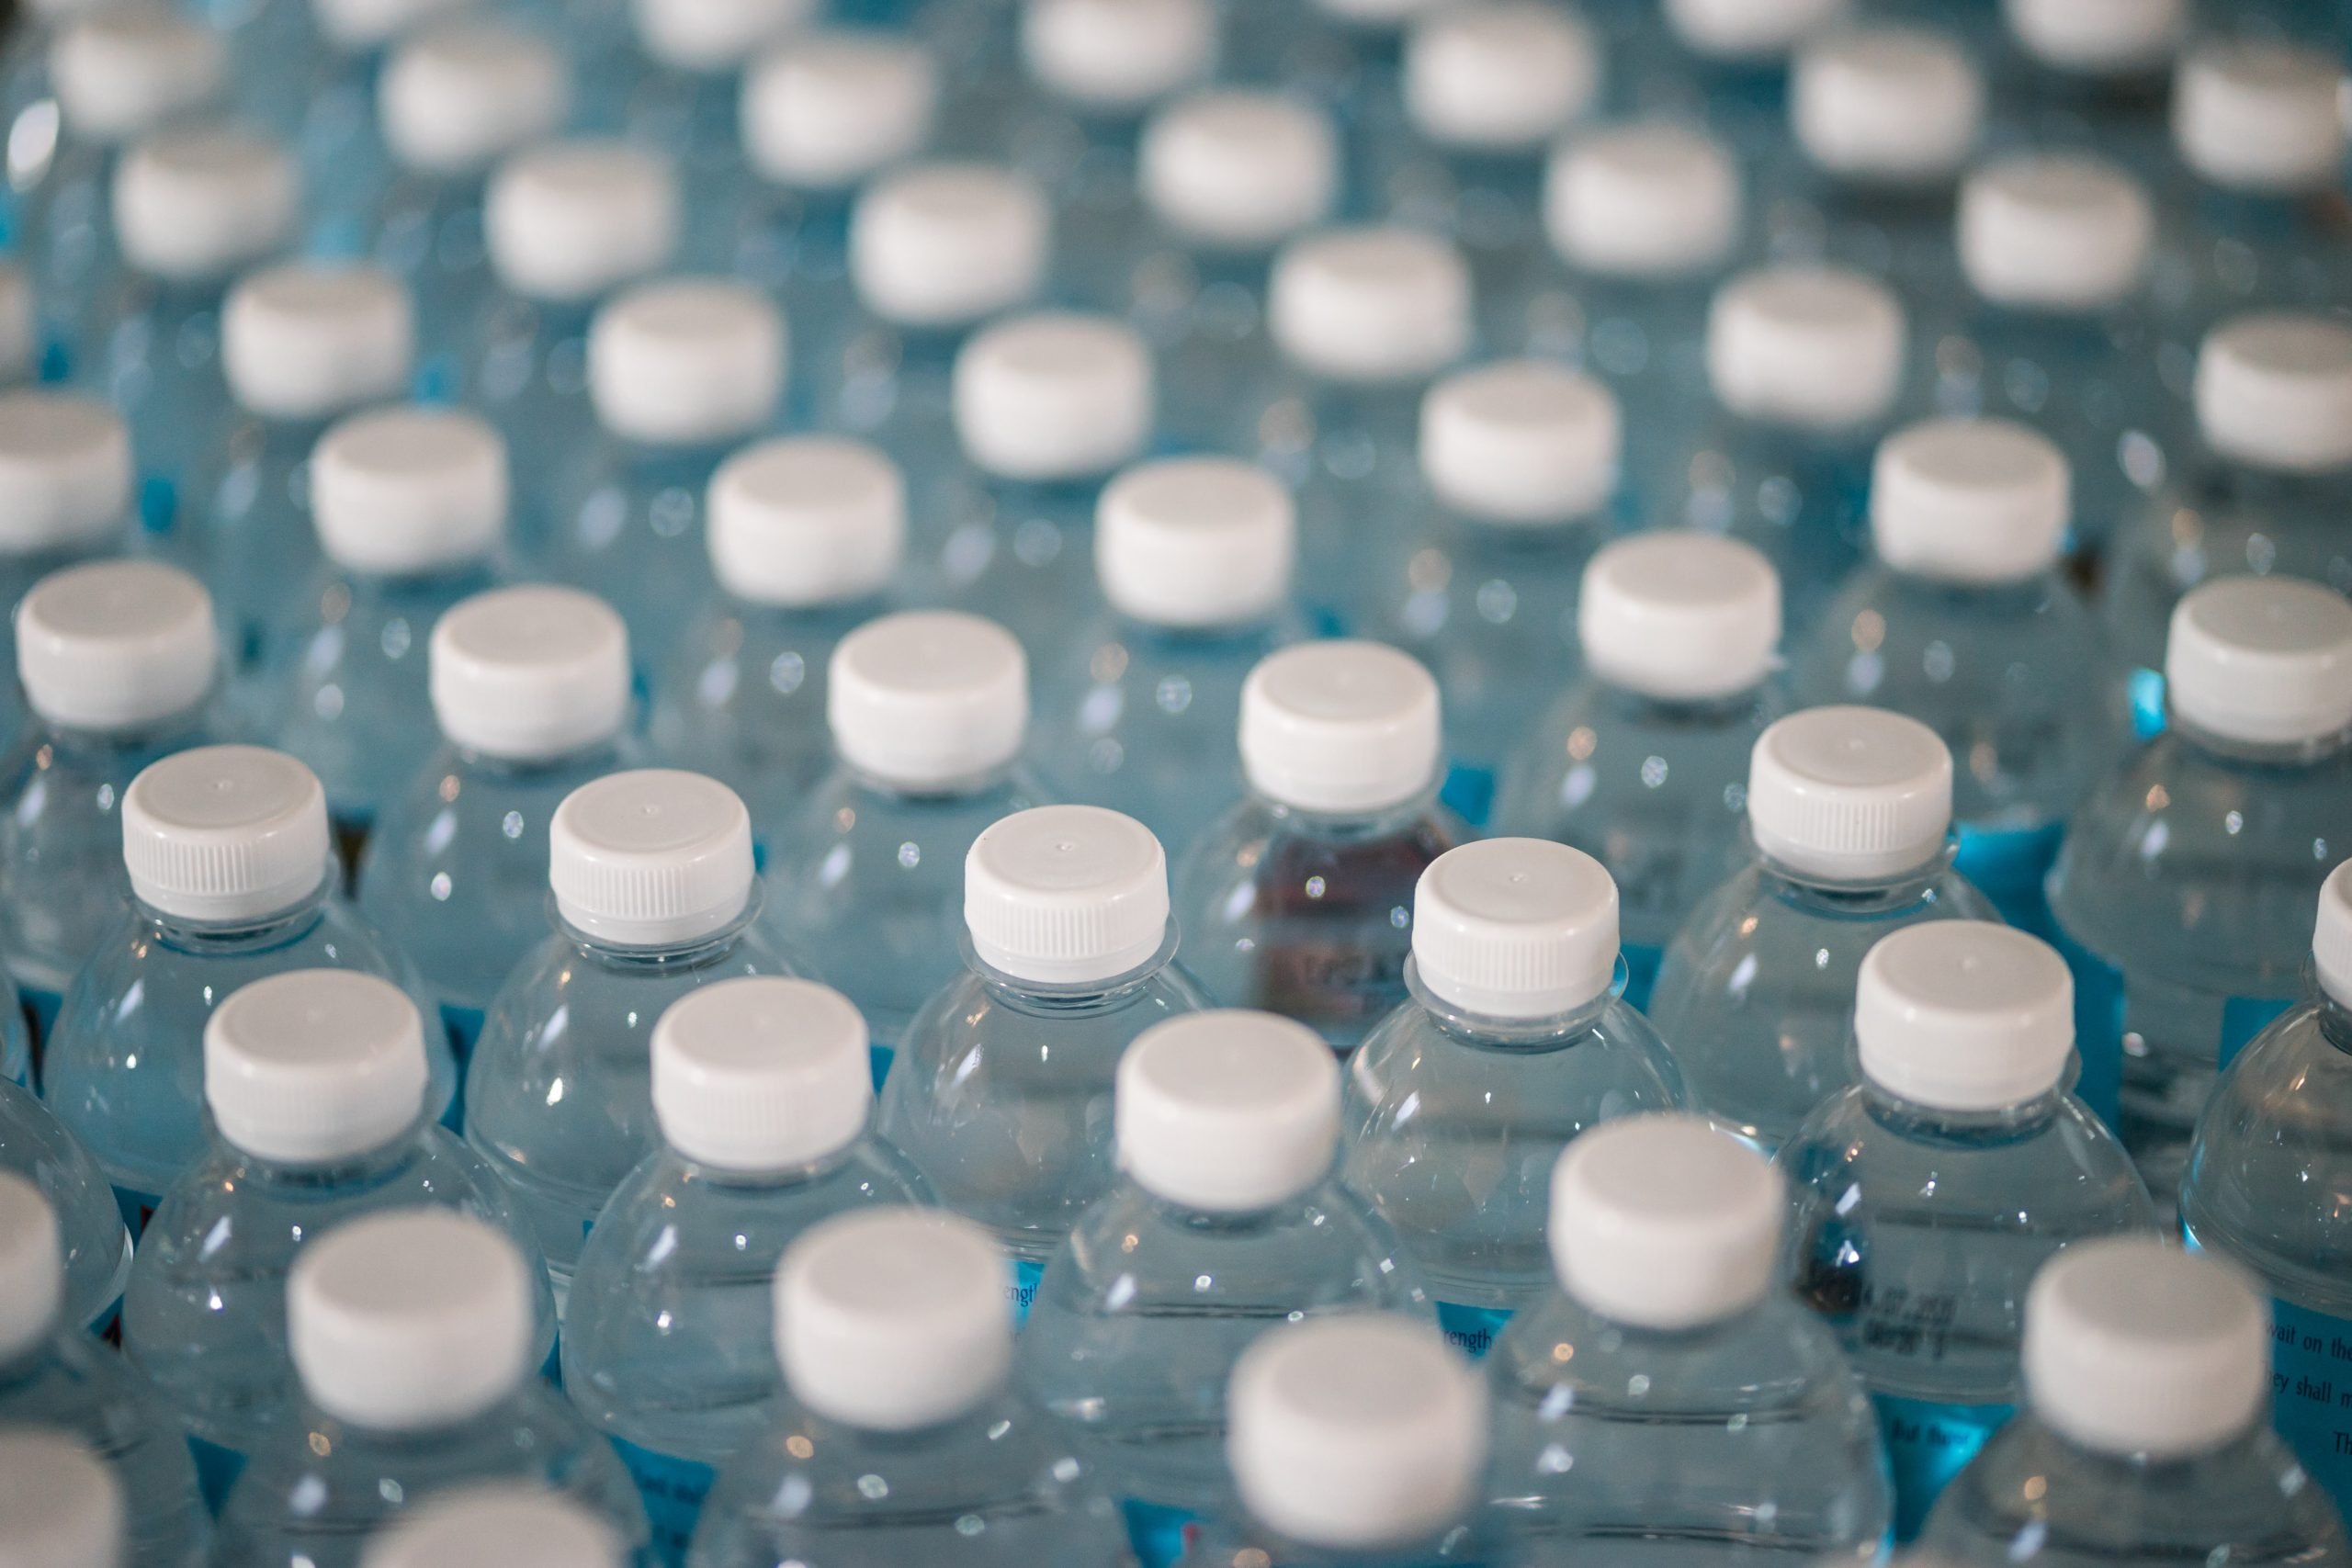 BPA-Free: What Does It Mean? And Does It Make Plastic Safer?